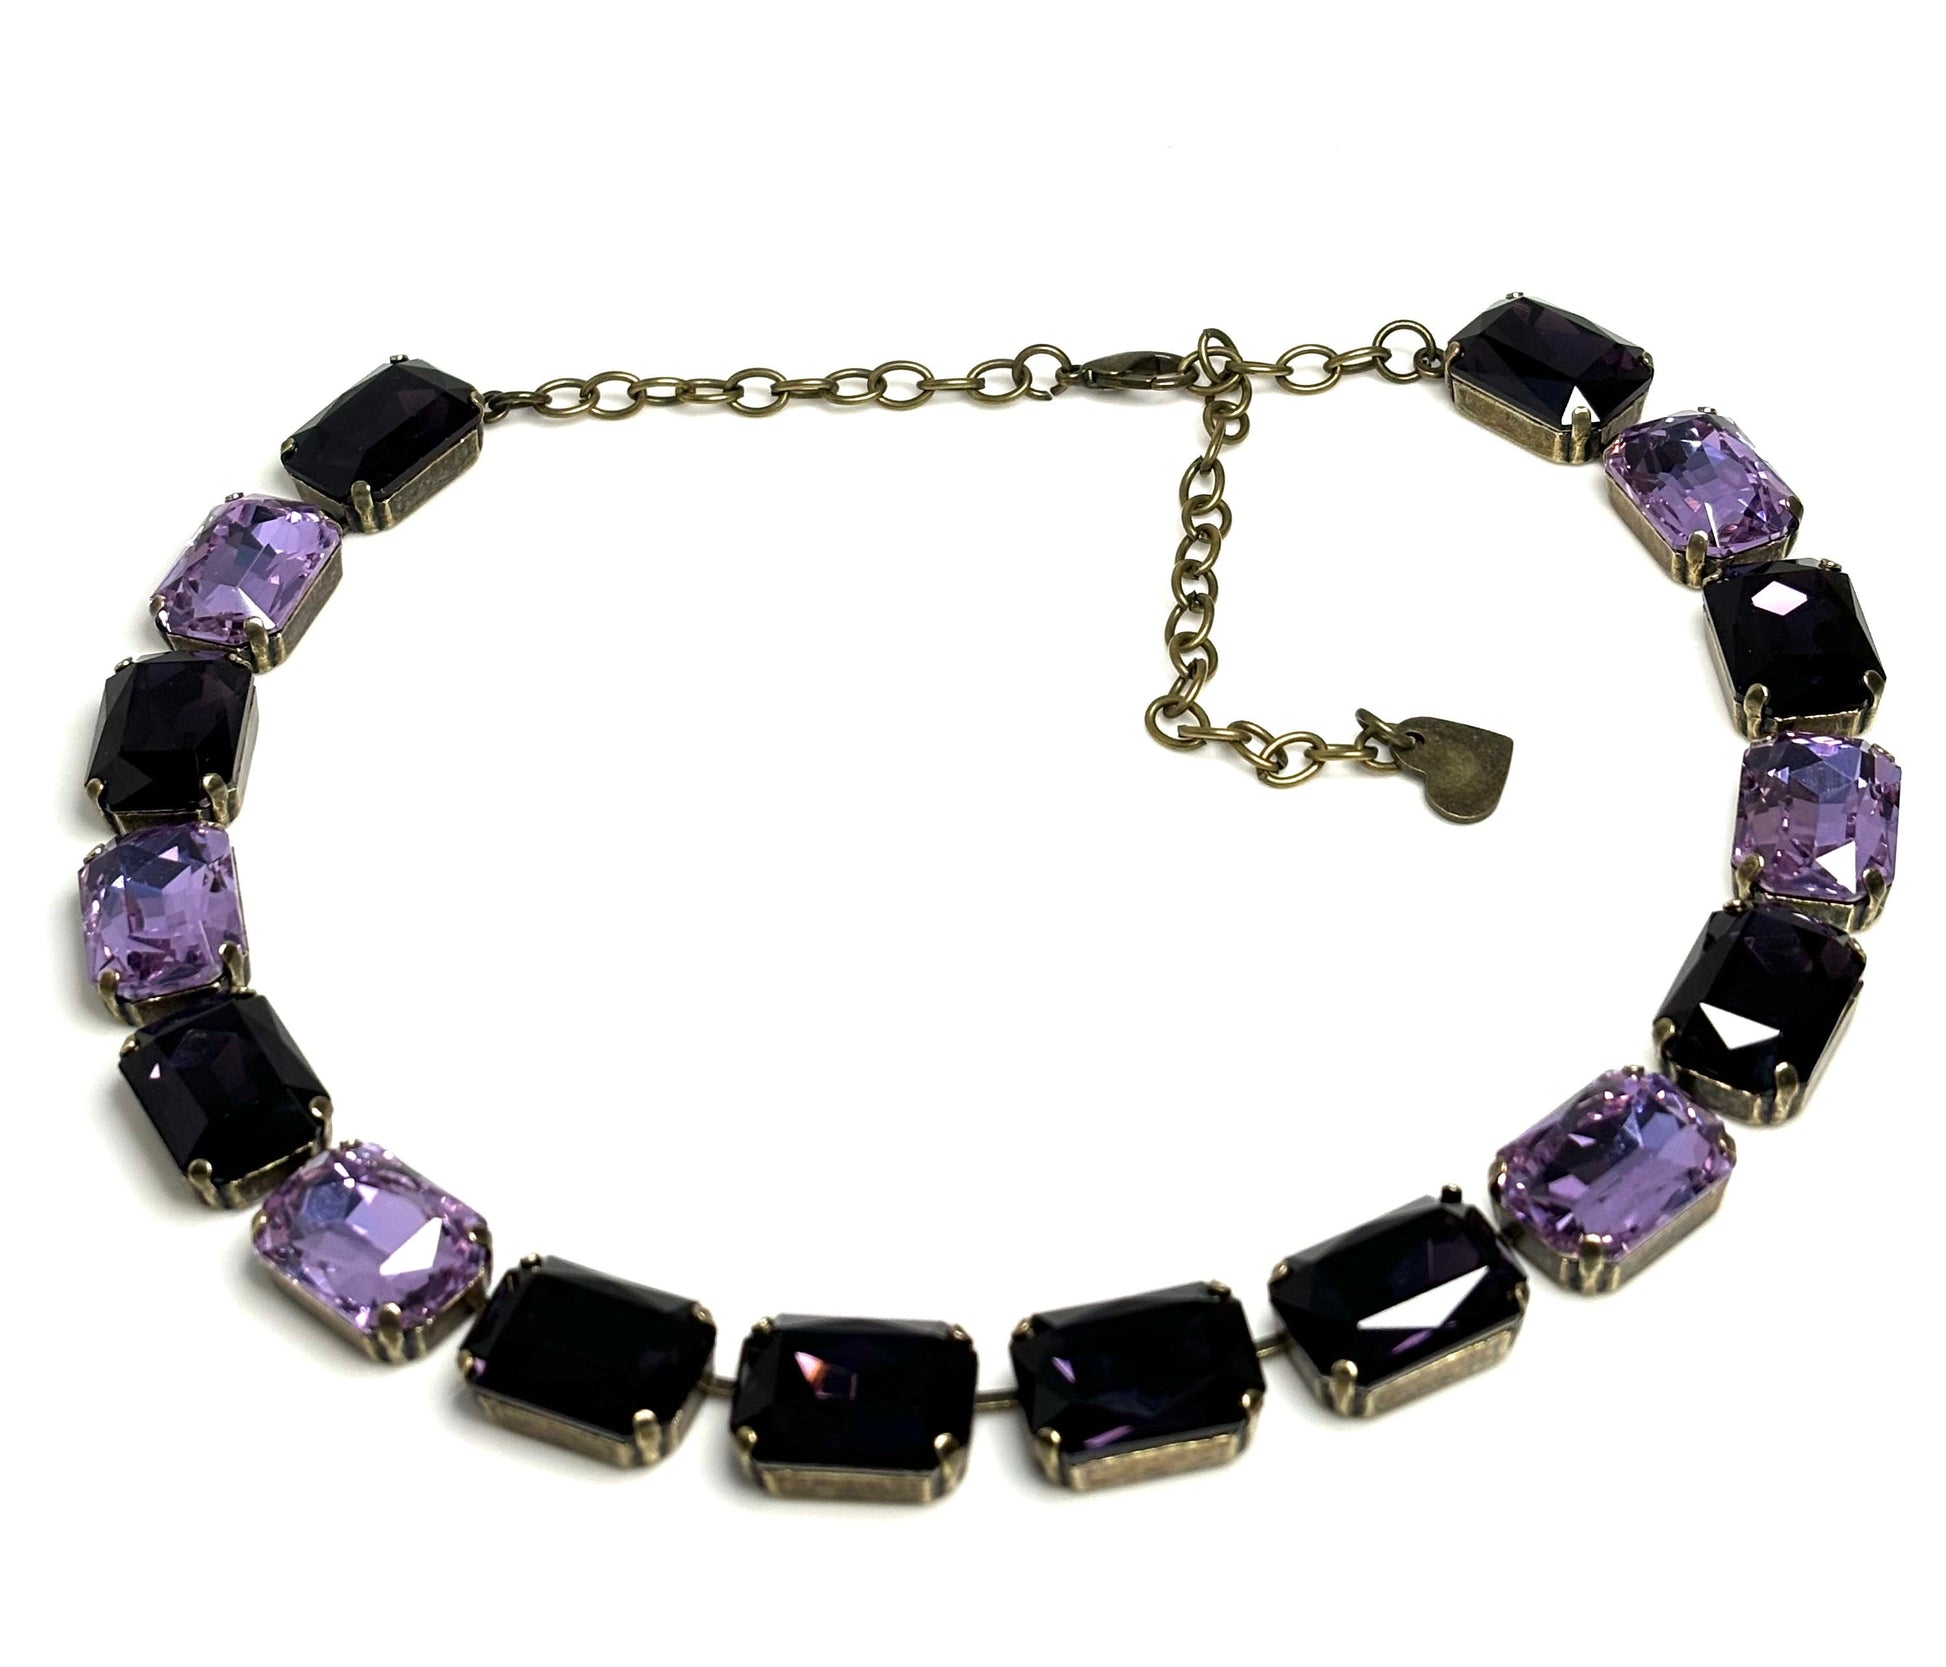 Violet Amethyst Crystal Georgian Collet Necklace, Anna Wintour Style, Purple Crystal Choker, Riviere Necklace, Statement Choker for Women